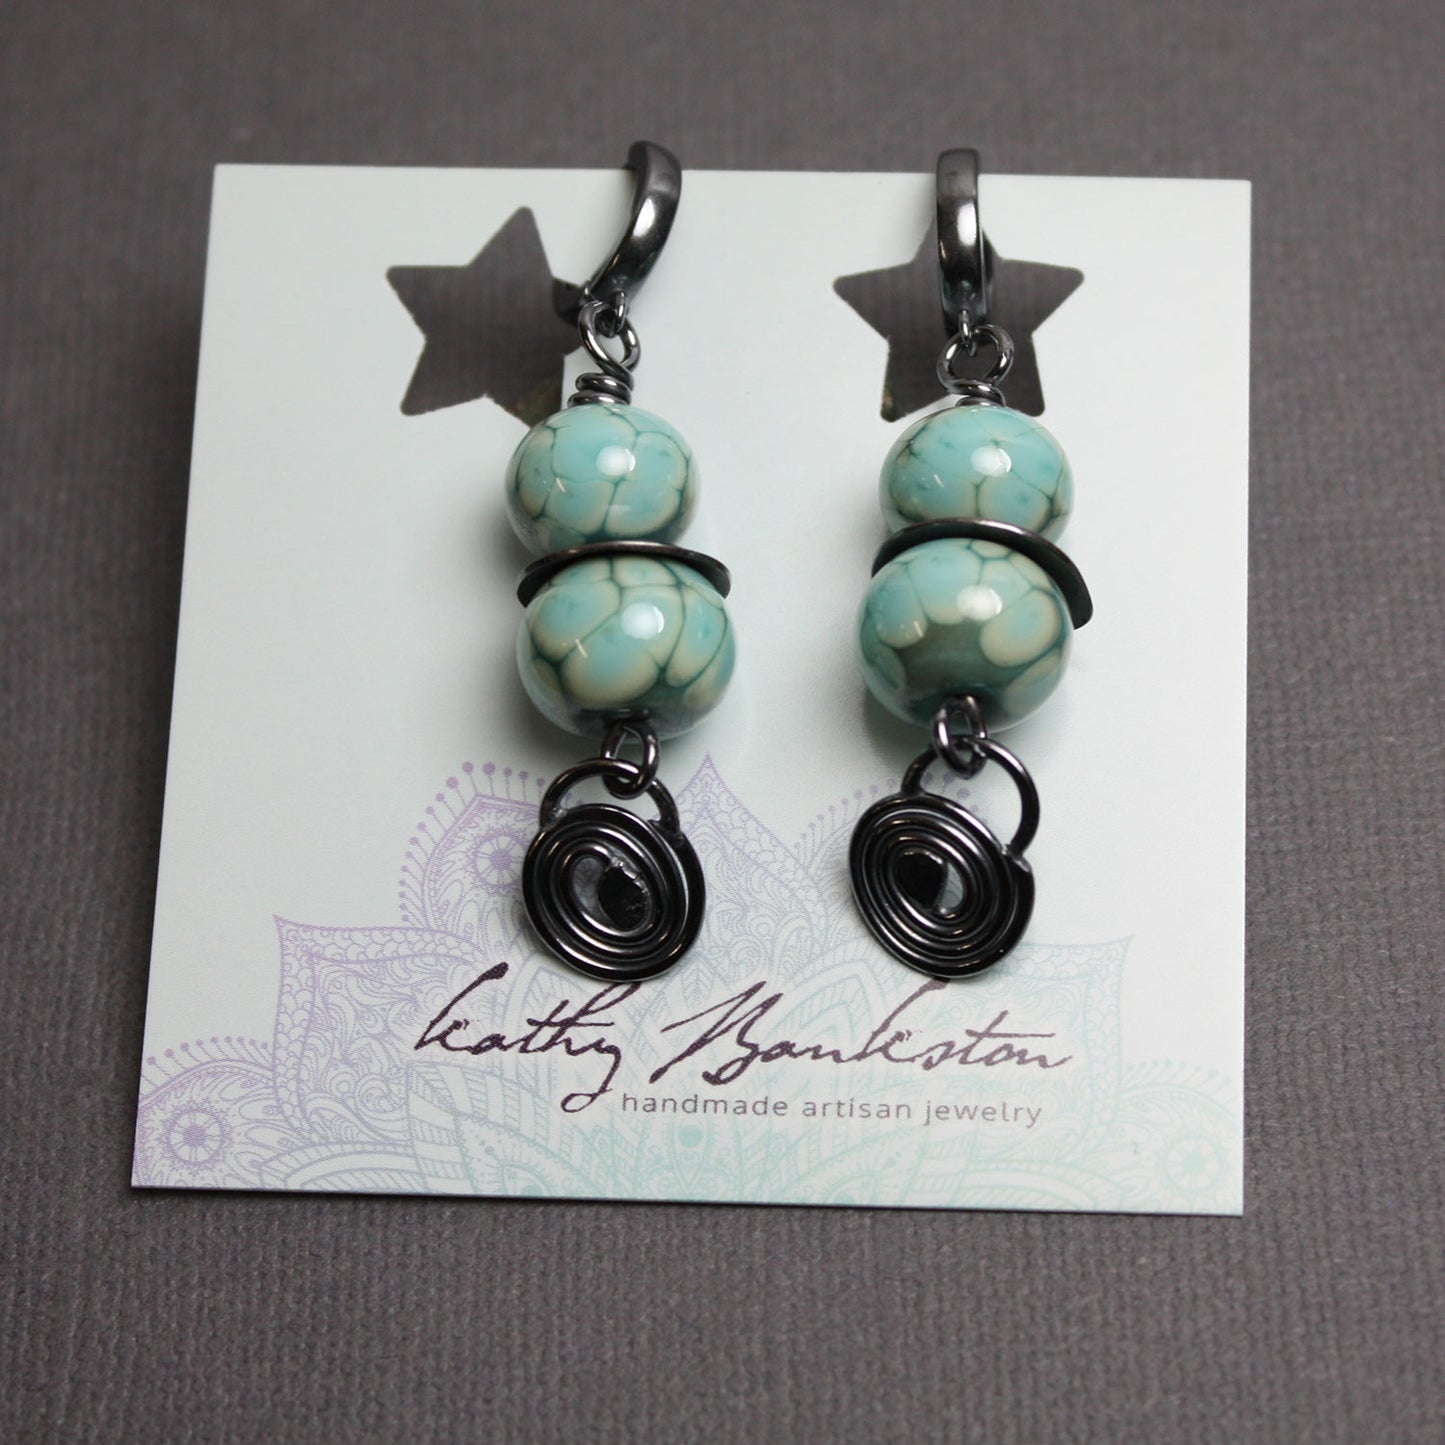 Load image into Gallery viewer, Turquoise Green Earrings with Sterling Silver Hinged Hoops  by Kathy Bankston
